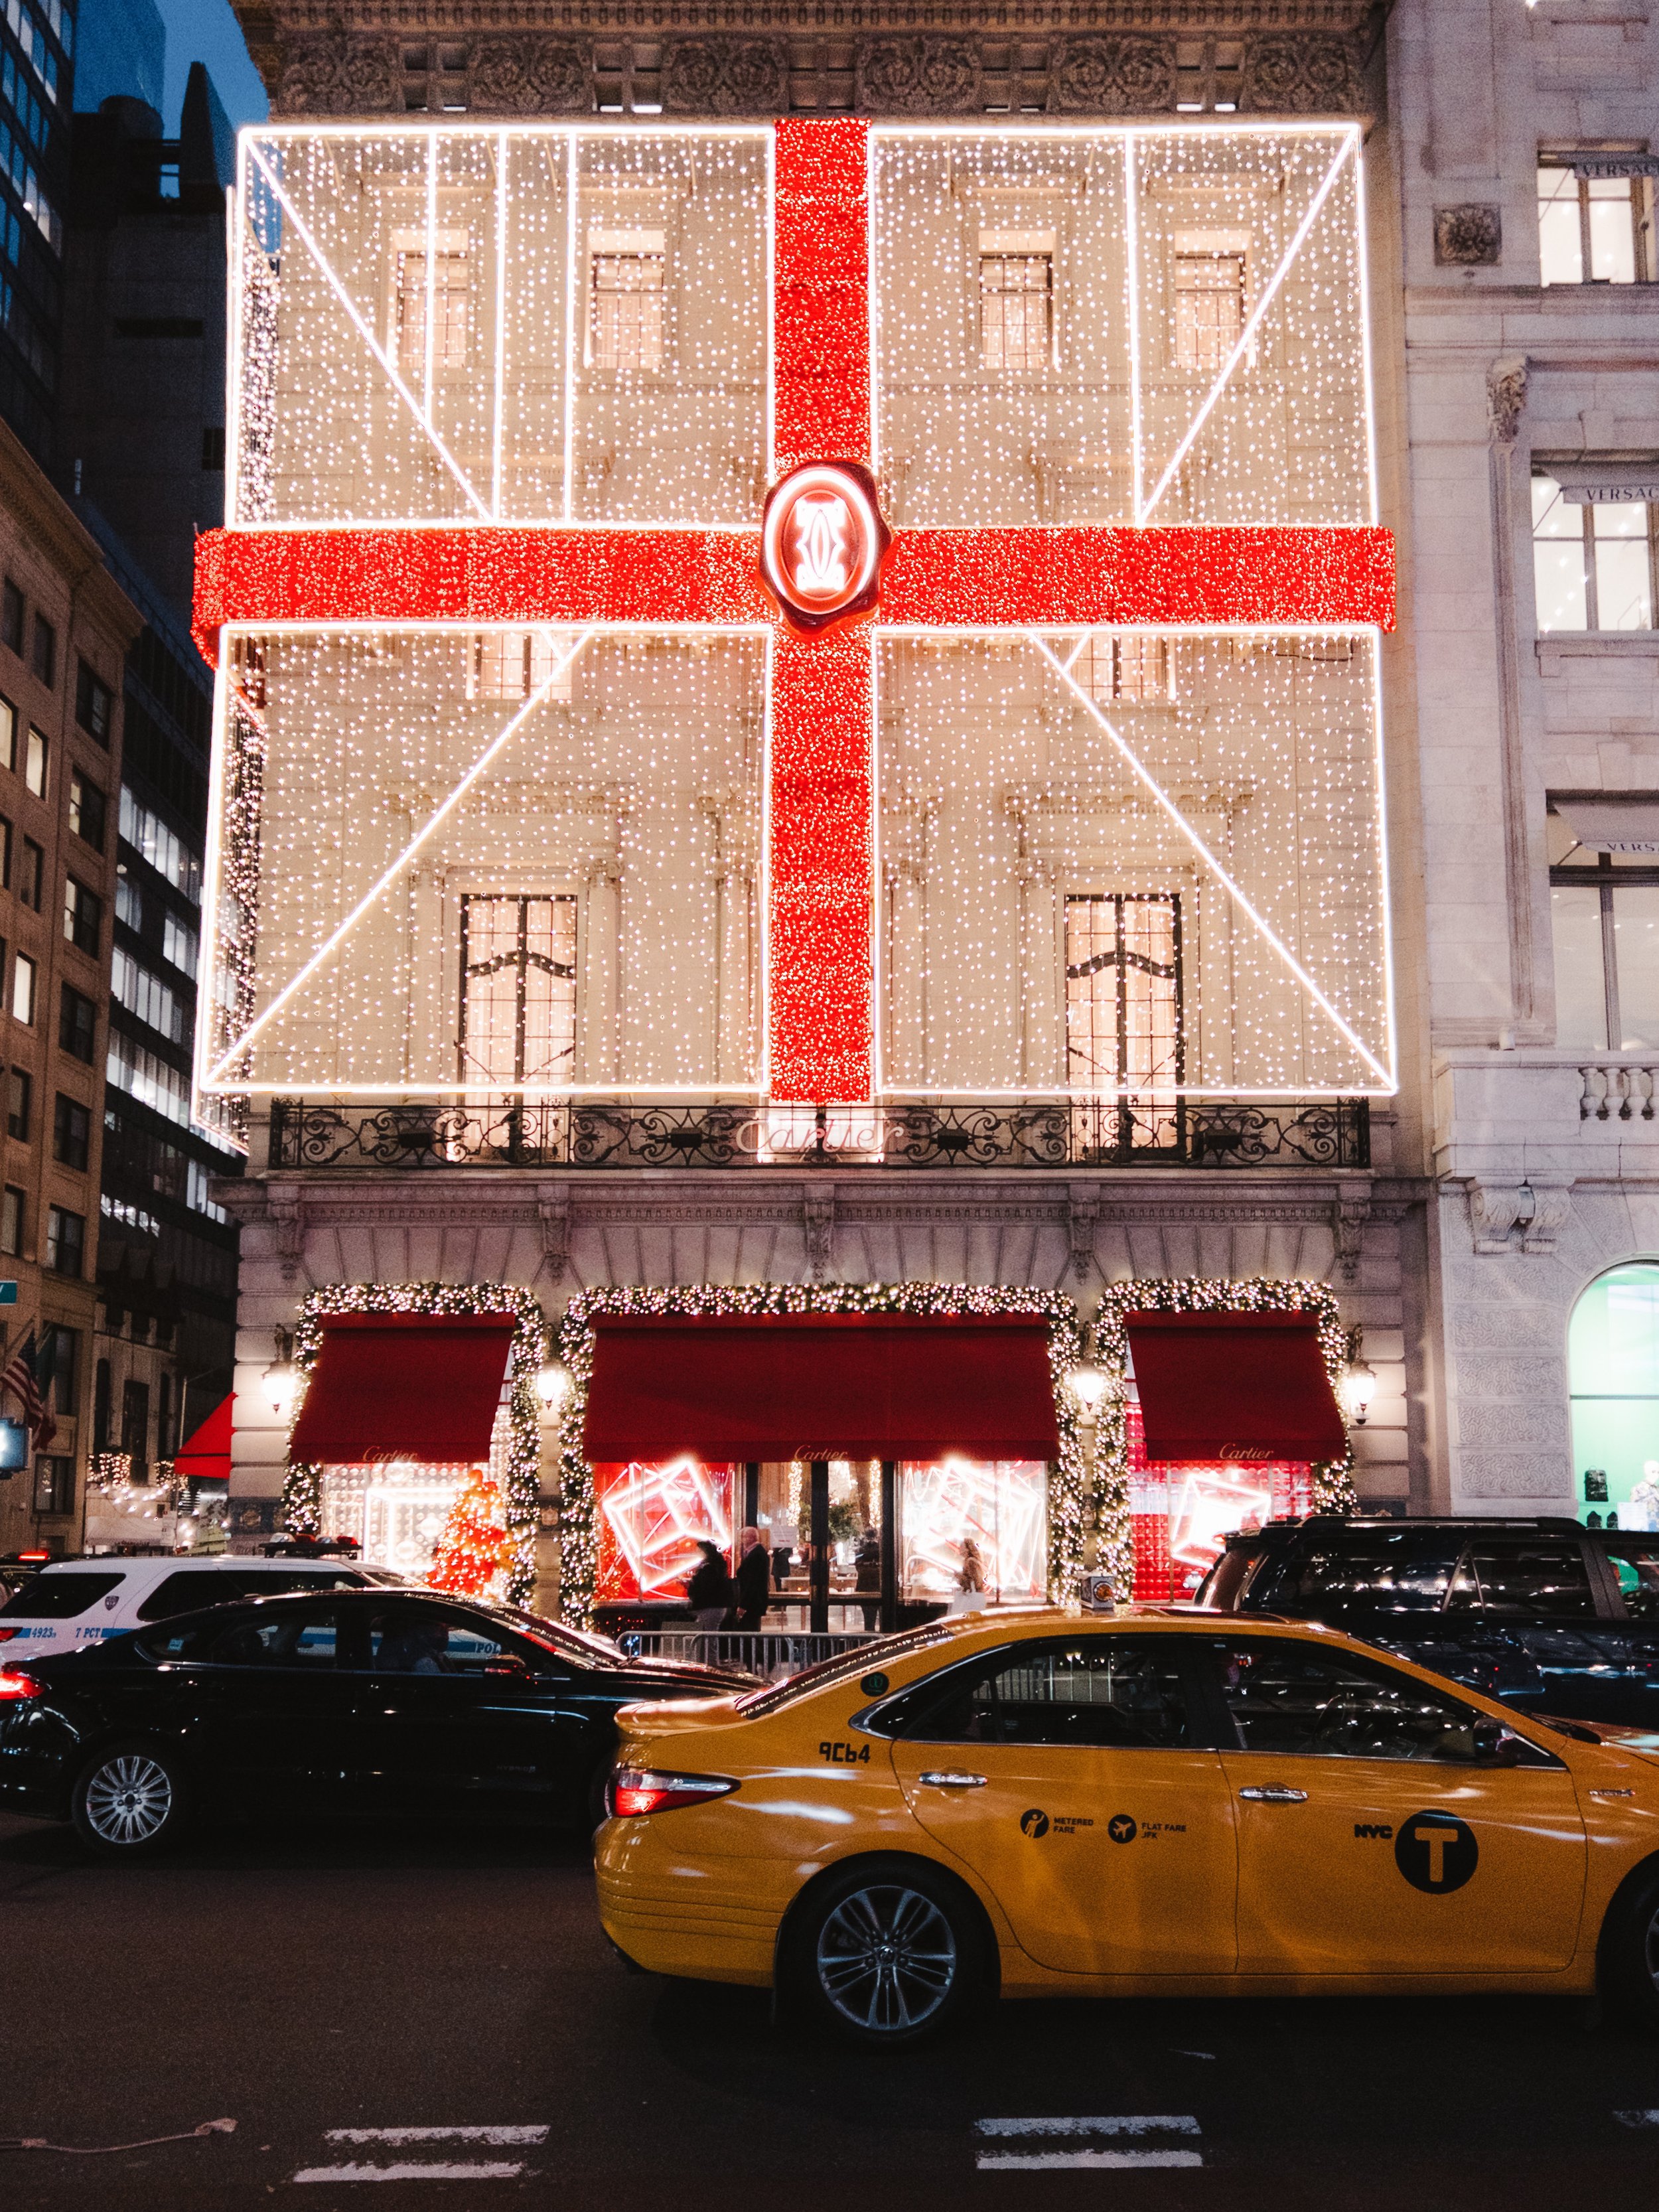 Cartier Flagship Store Front on Fifth Avenue, Holiday Season, NYC